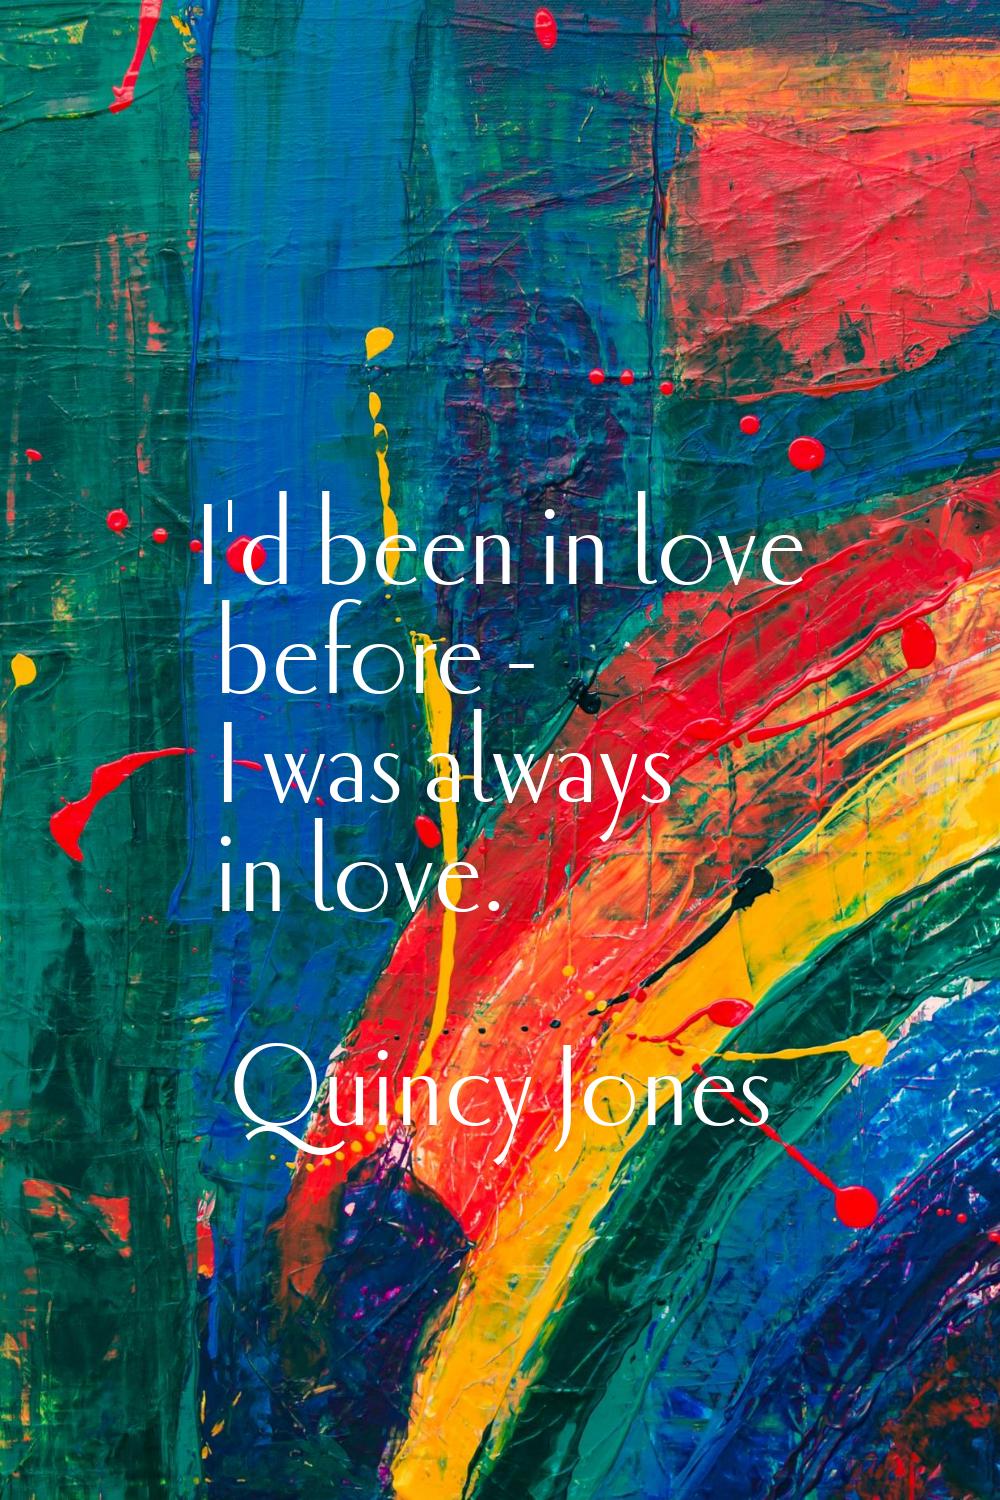 I'd been in love before - I was always in love.